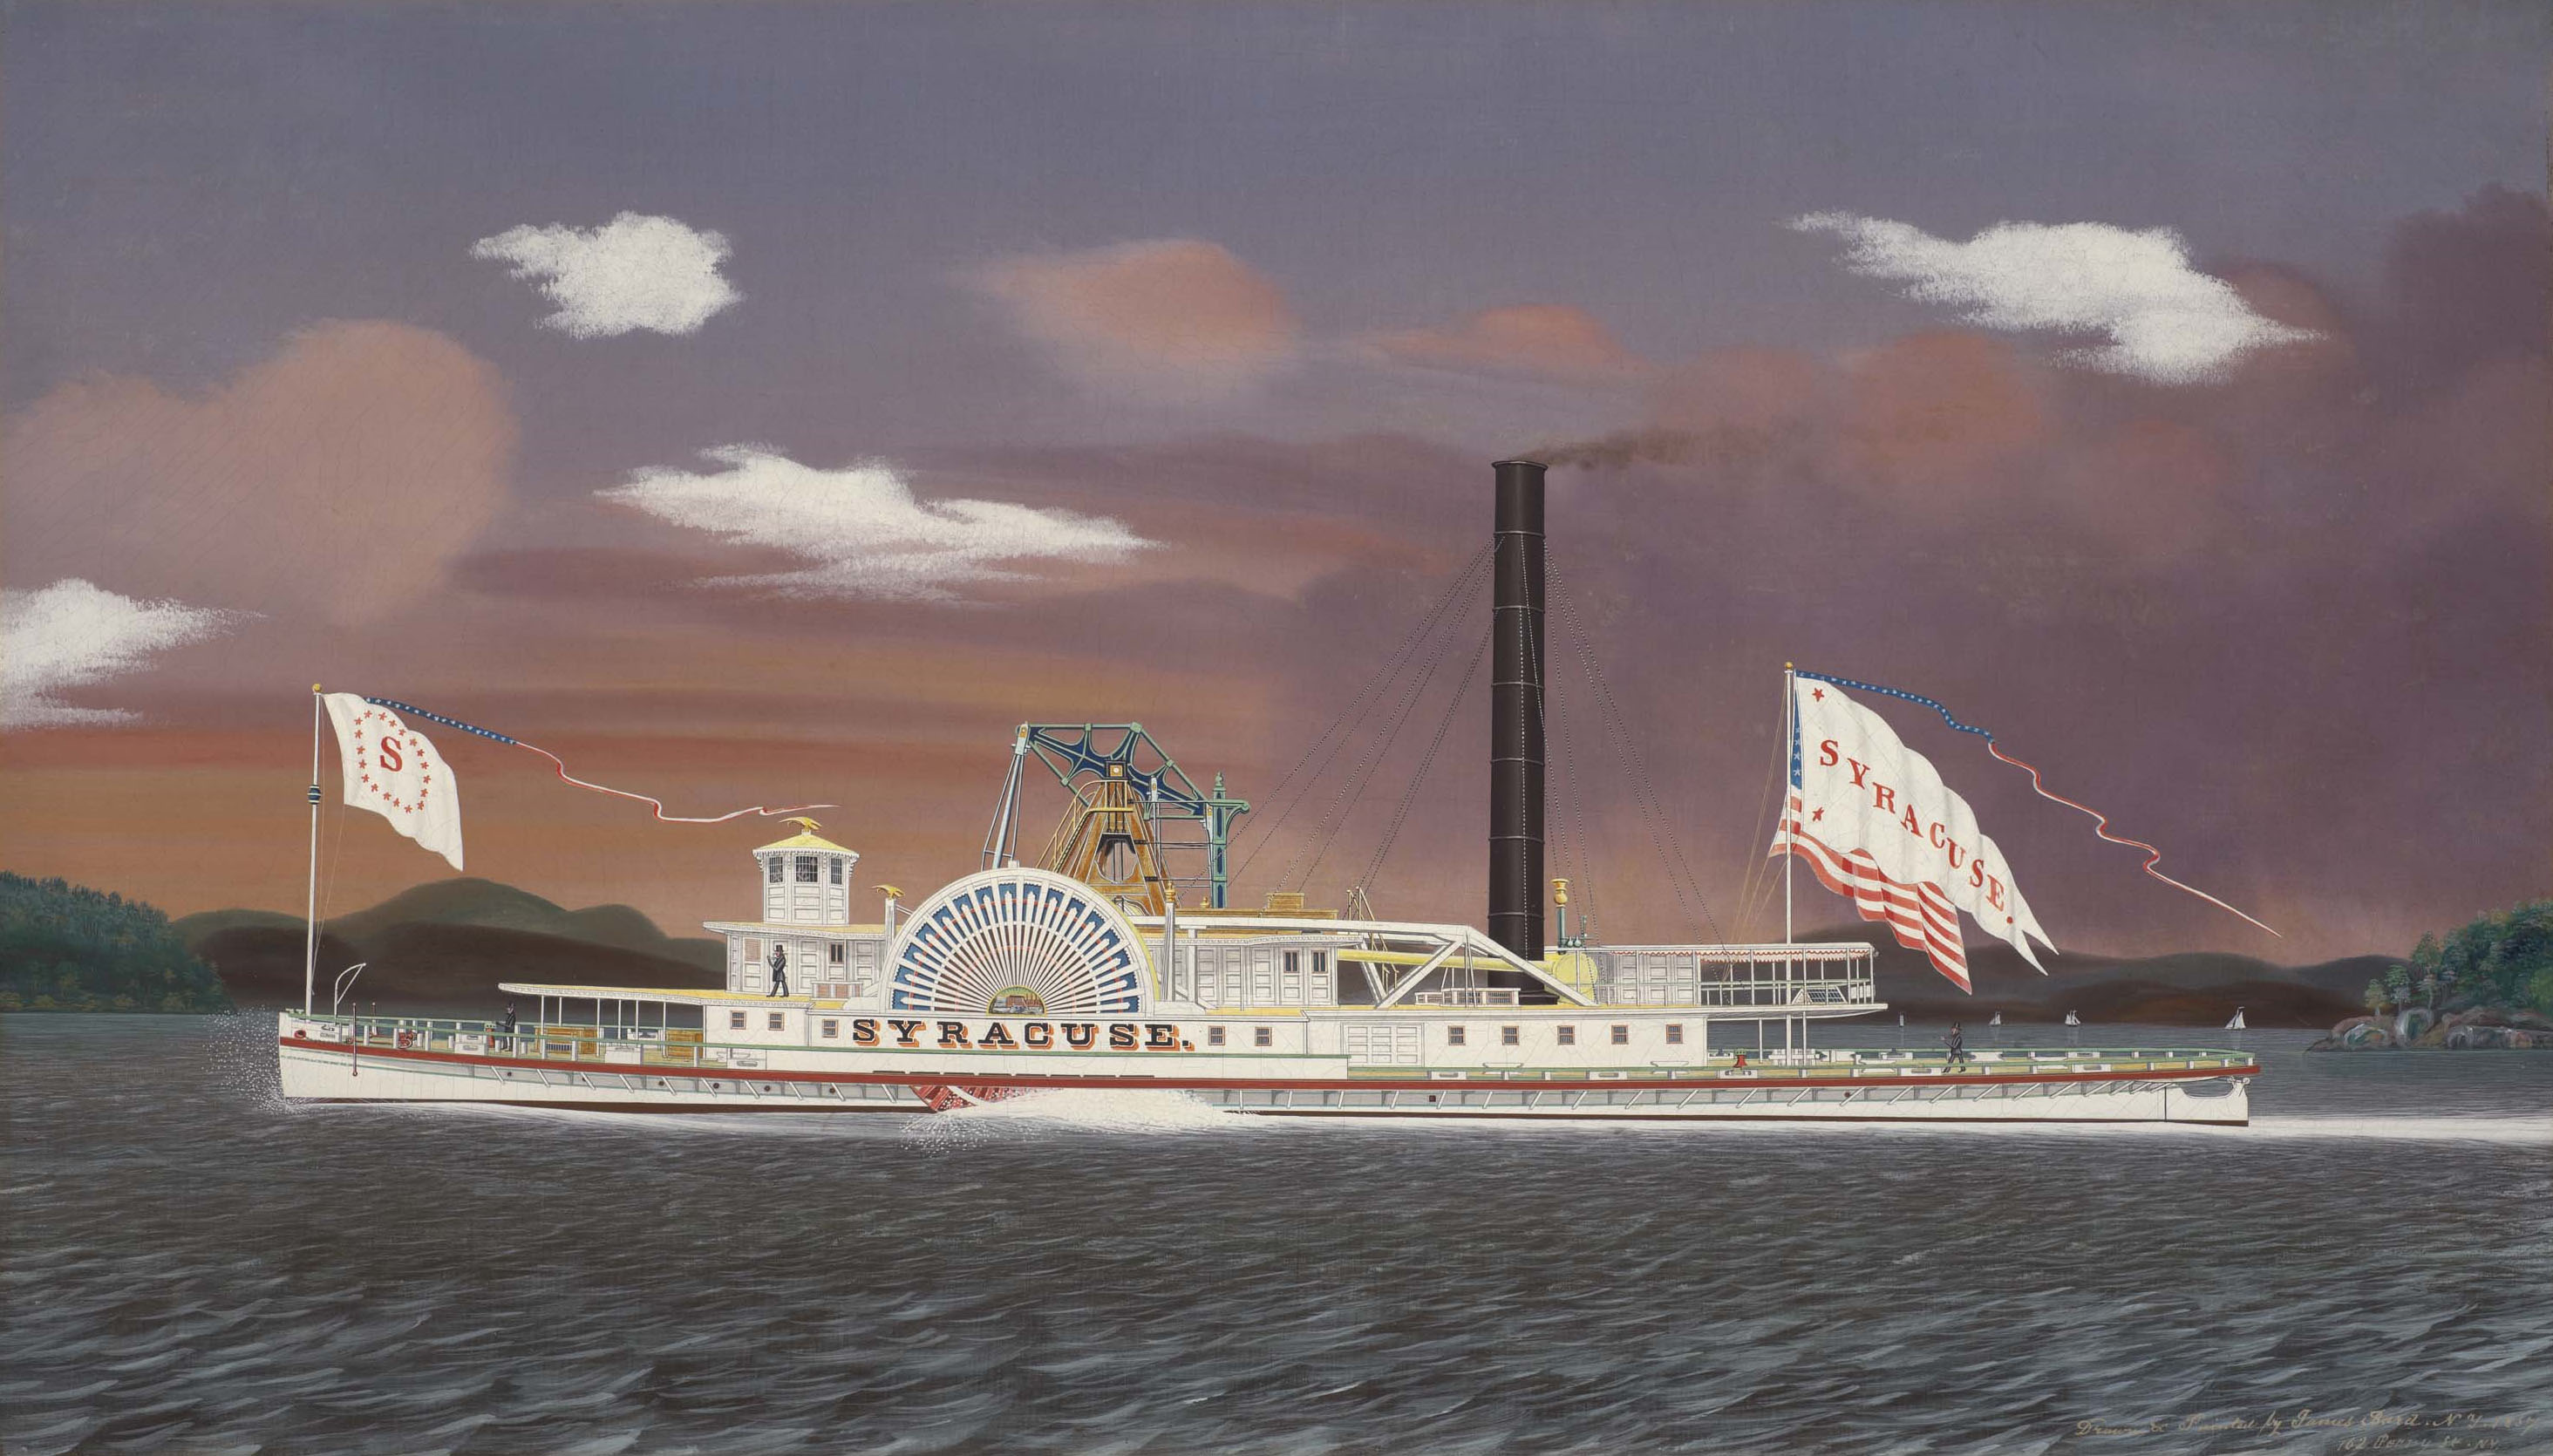 The Steamship Syracuse by James Bard